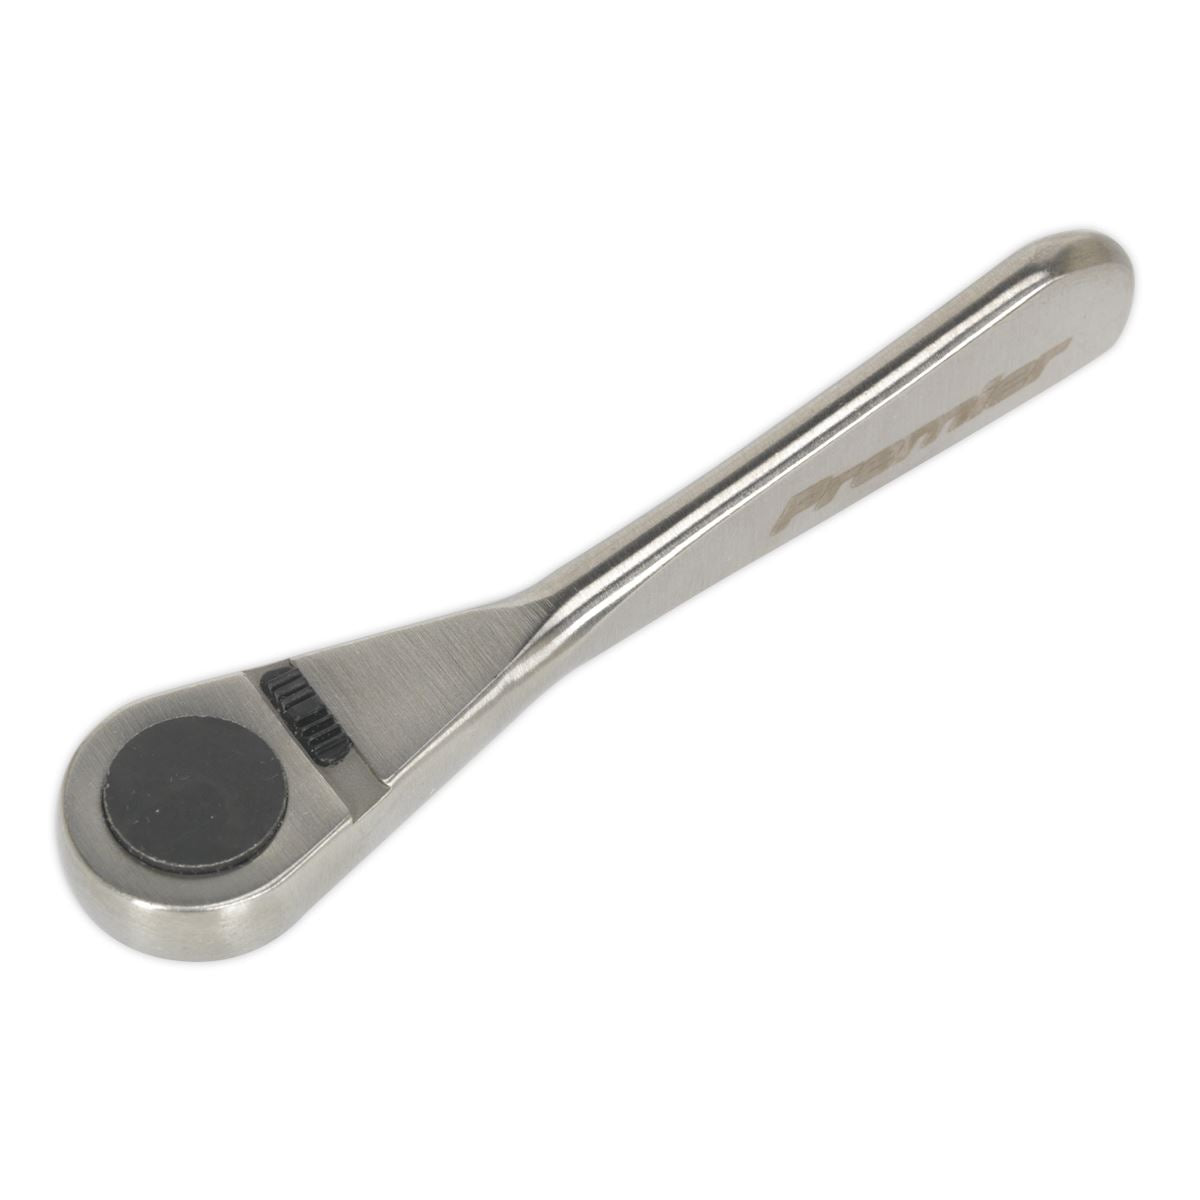 Sealey Premier Ratchet Wrench Micro 1/4"Sq Drive Stainless Steel